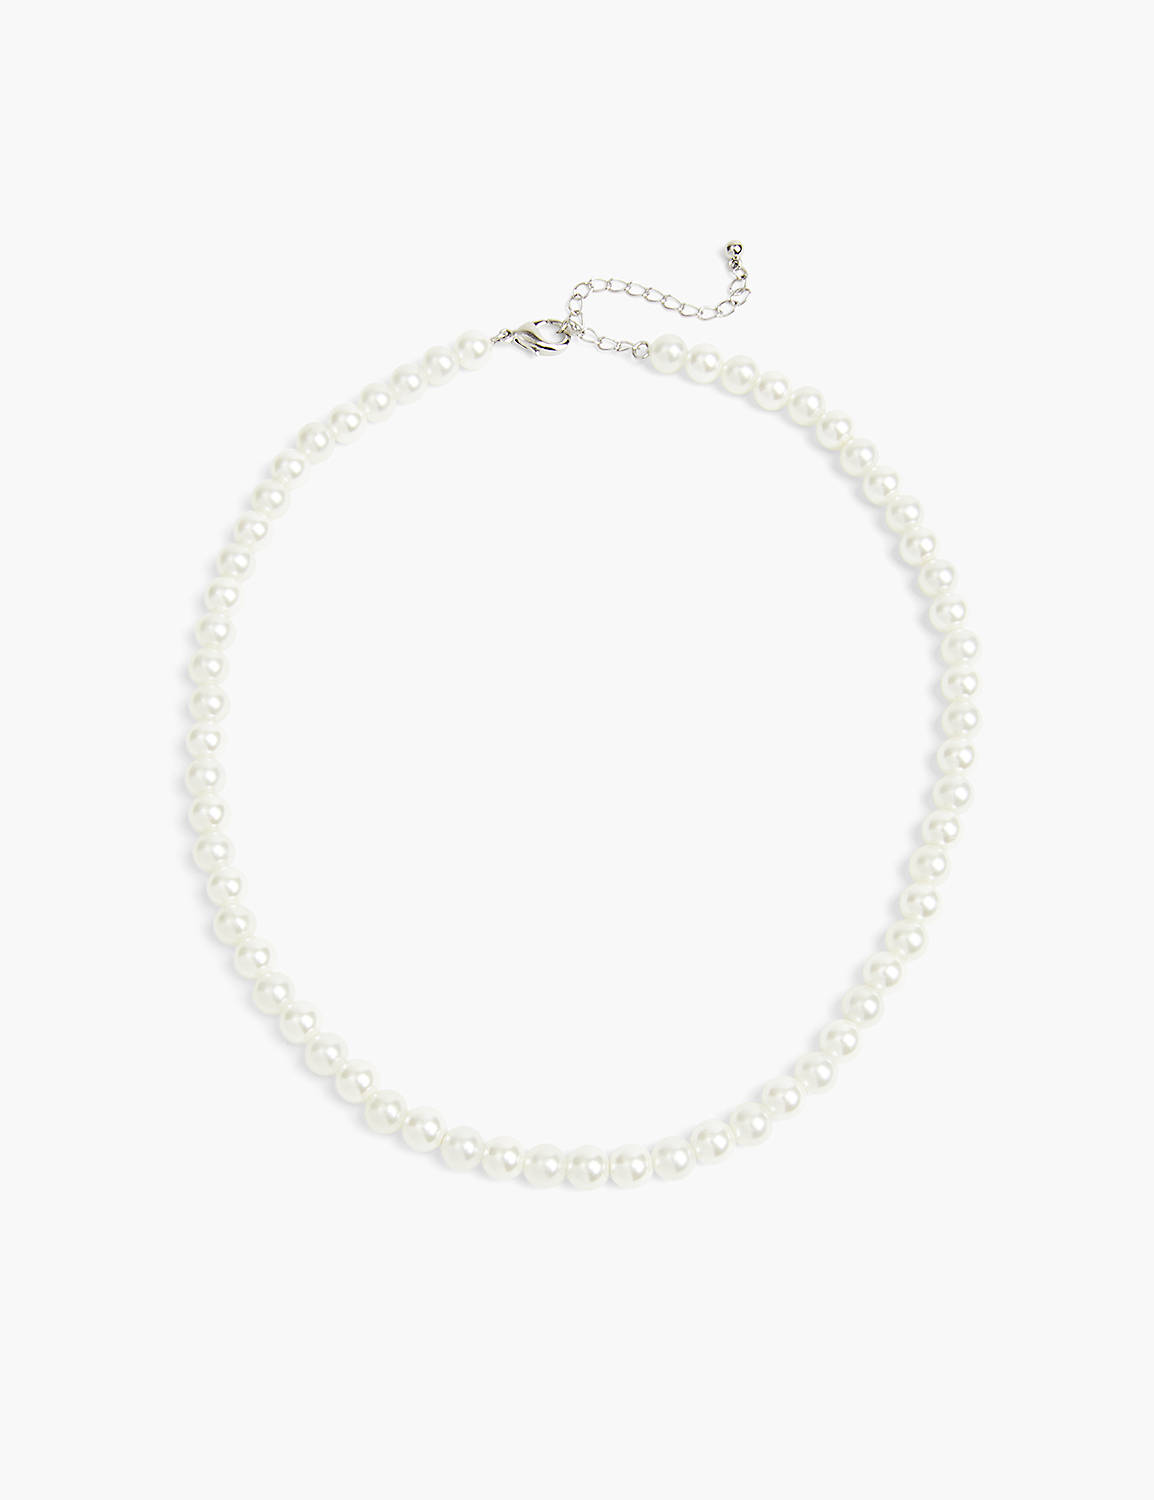 Pearl Strand Necklace Product Image 1